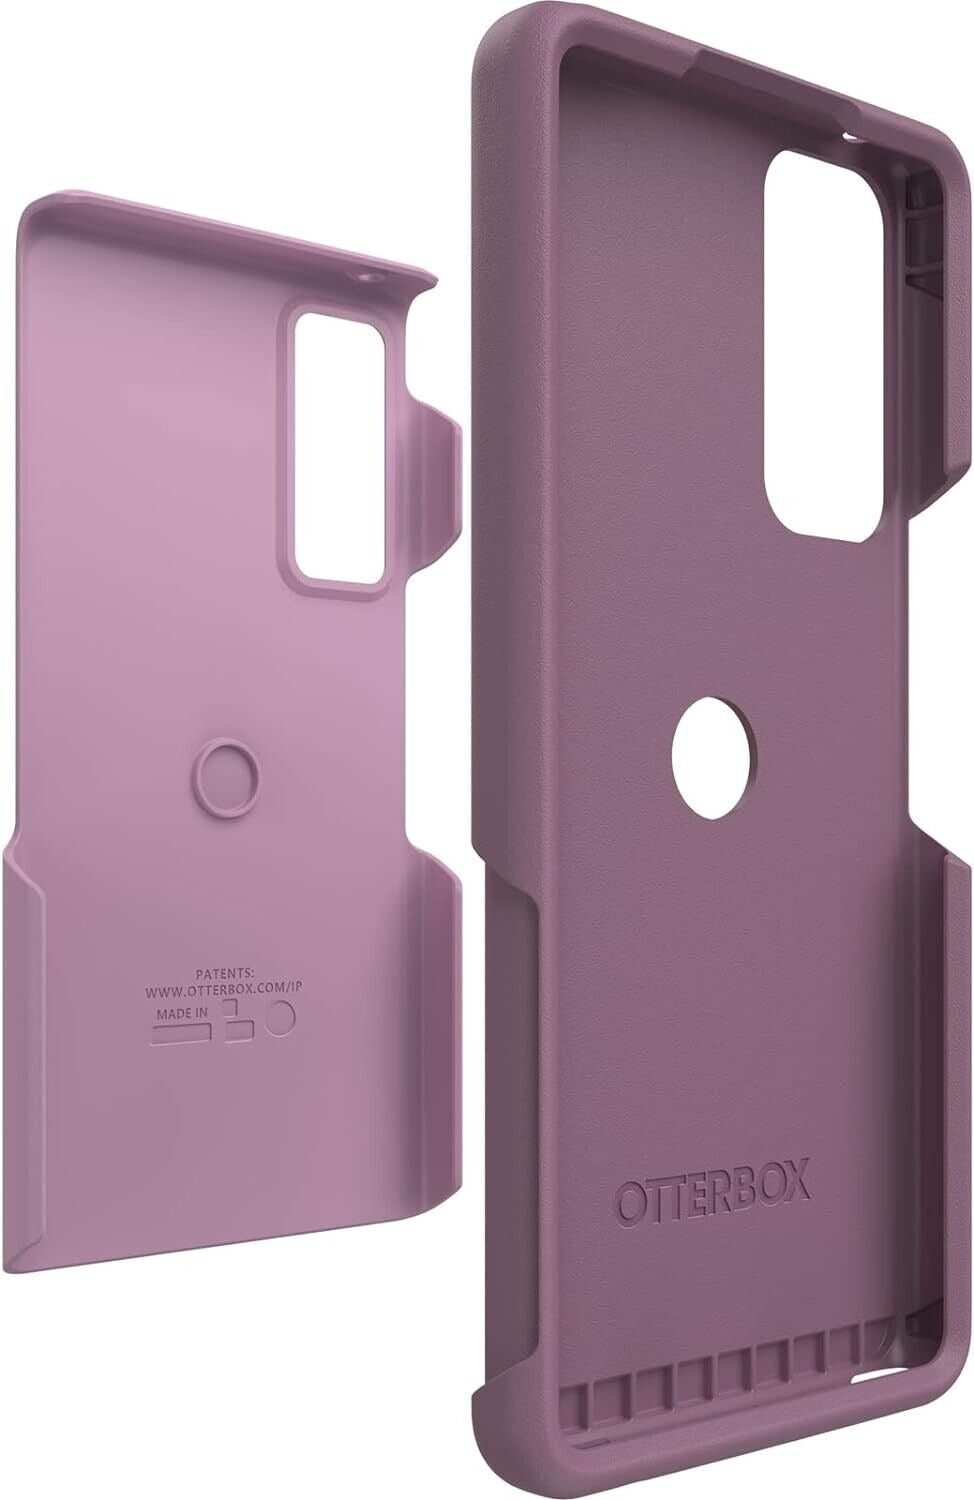 OtterBox COMMUTER LITE Case for TCL Stylus 5G - Maven Way (New)